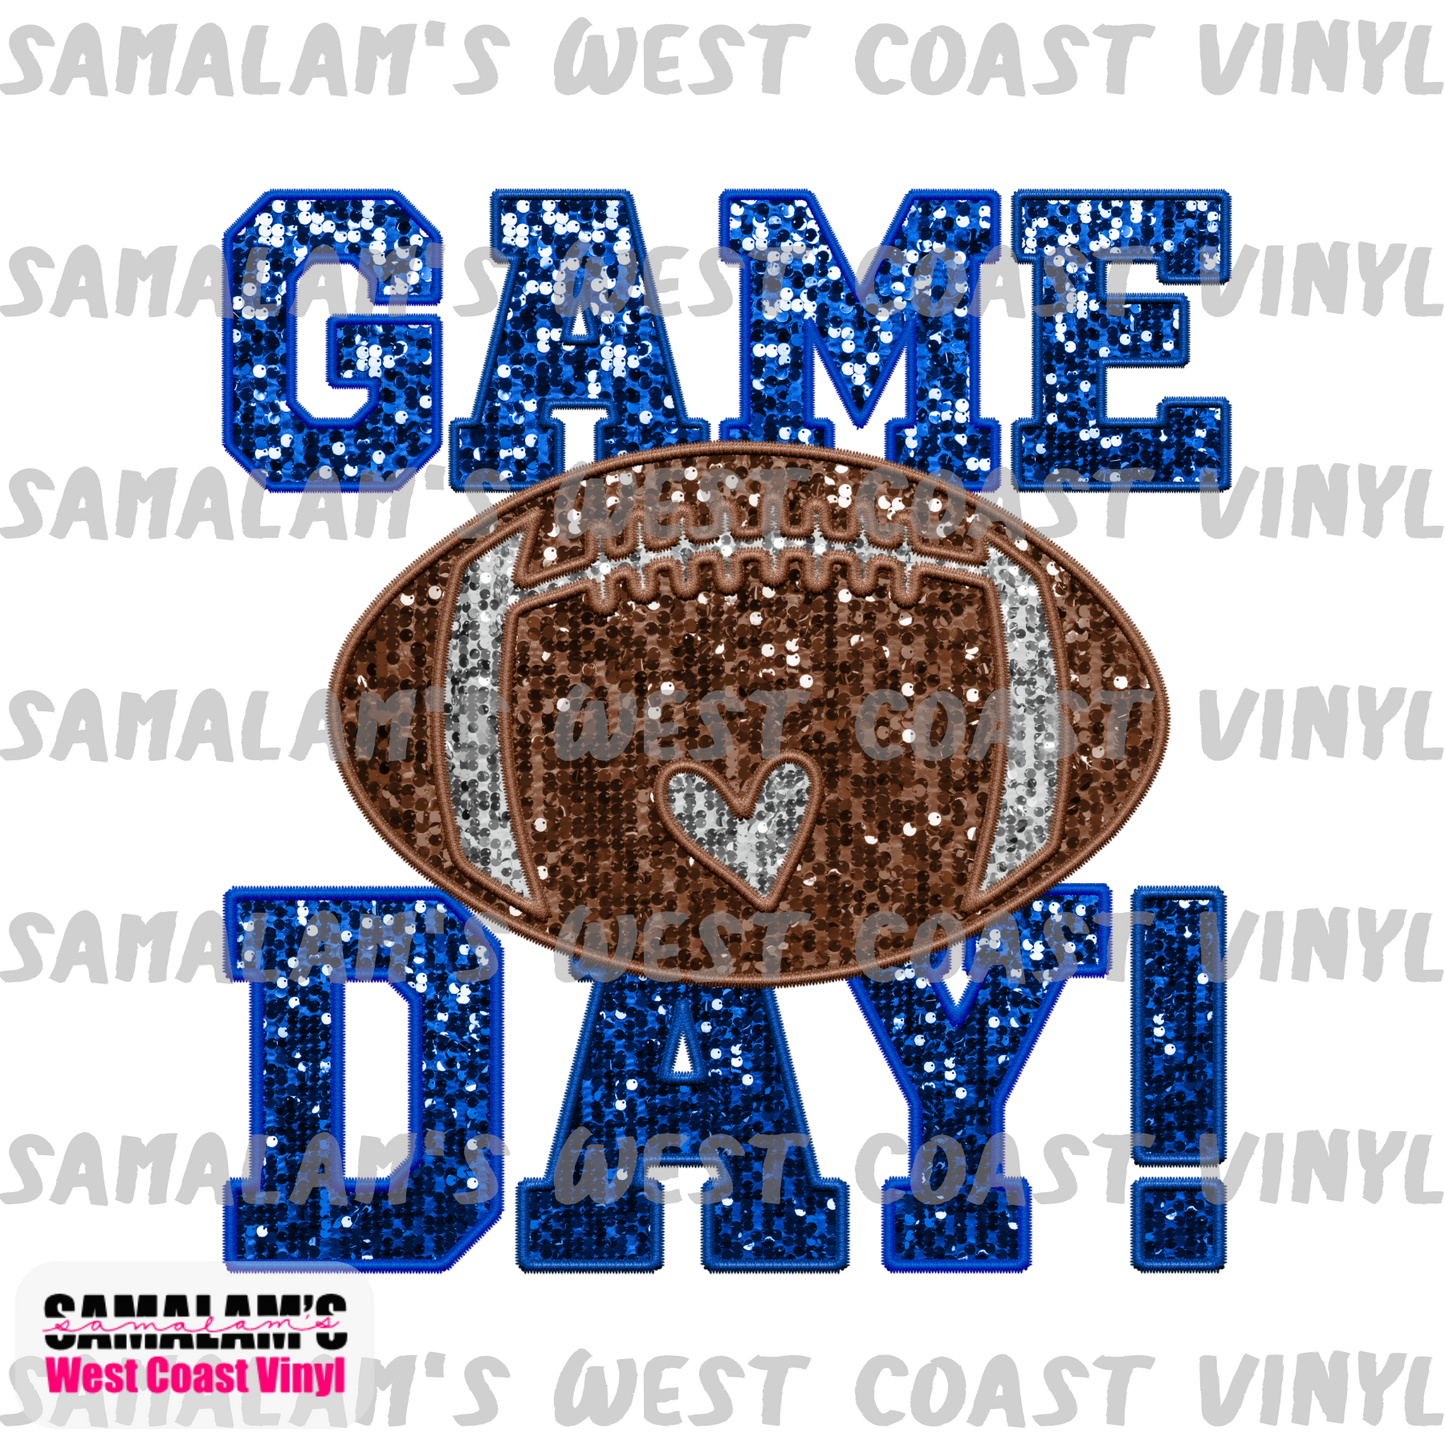 Embroidery - Game Day - Blue - Clear Cast Decal